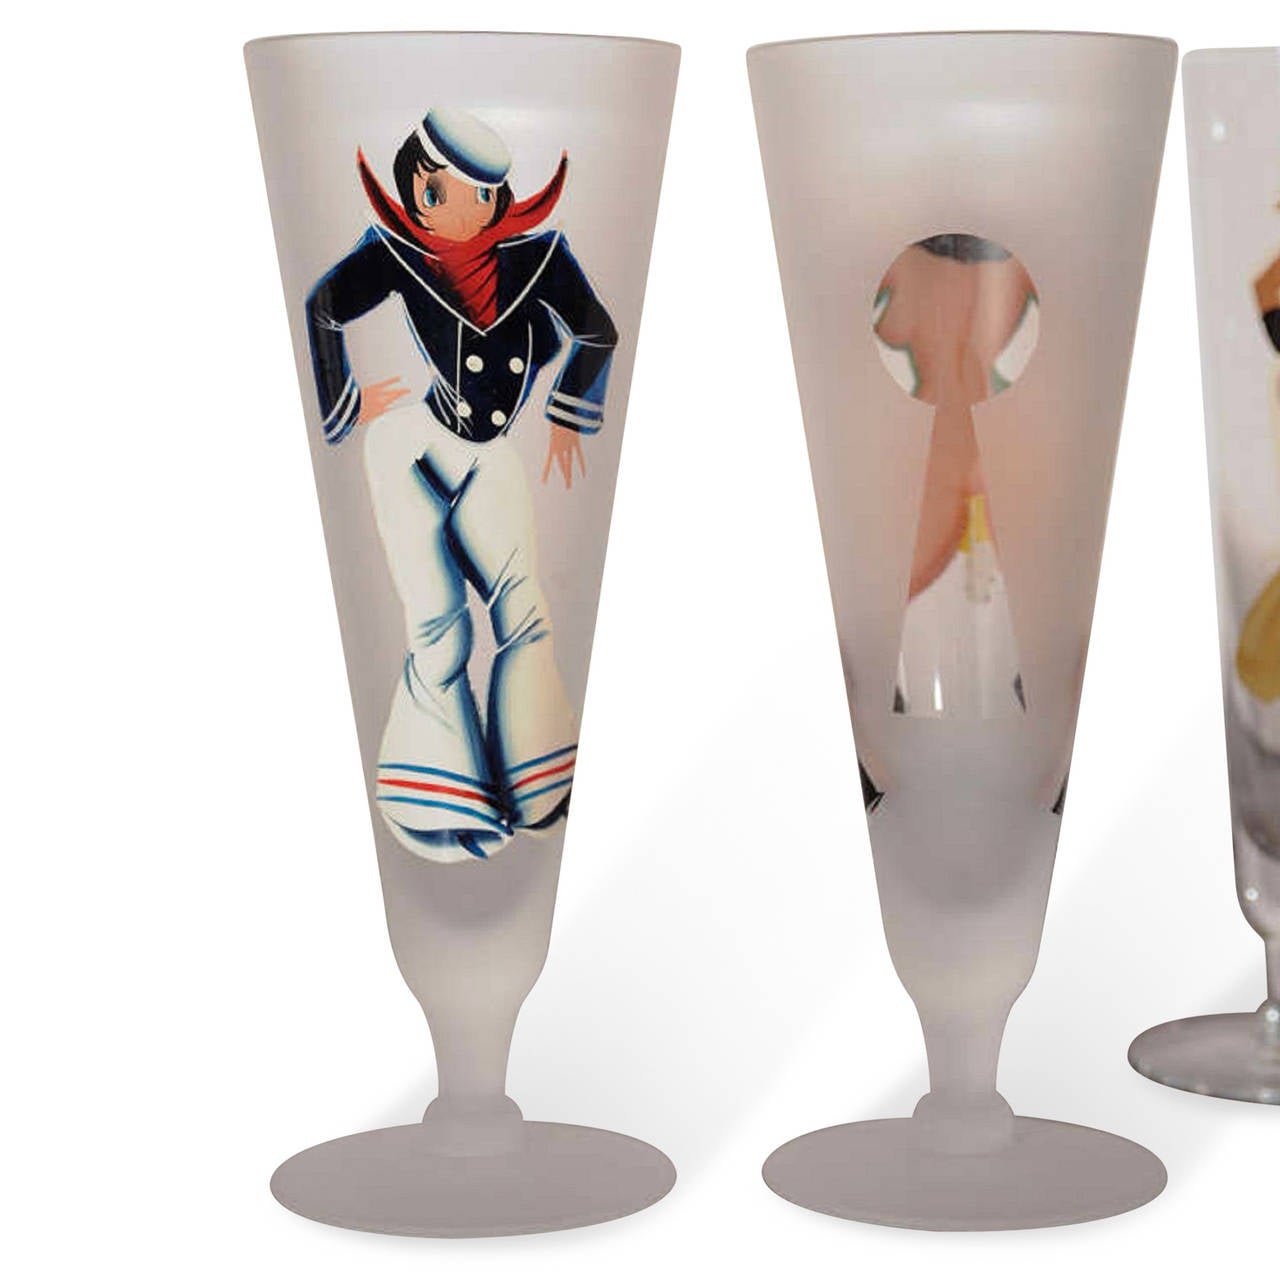 Mid-20th Century Set of Hand-Painted Pin Up Girl Drinking Glasses from the Estate of Doris Duke